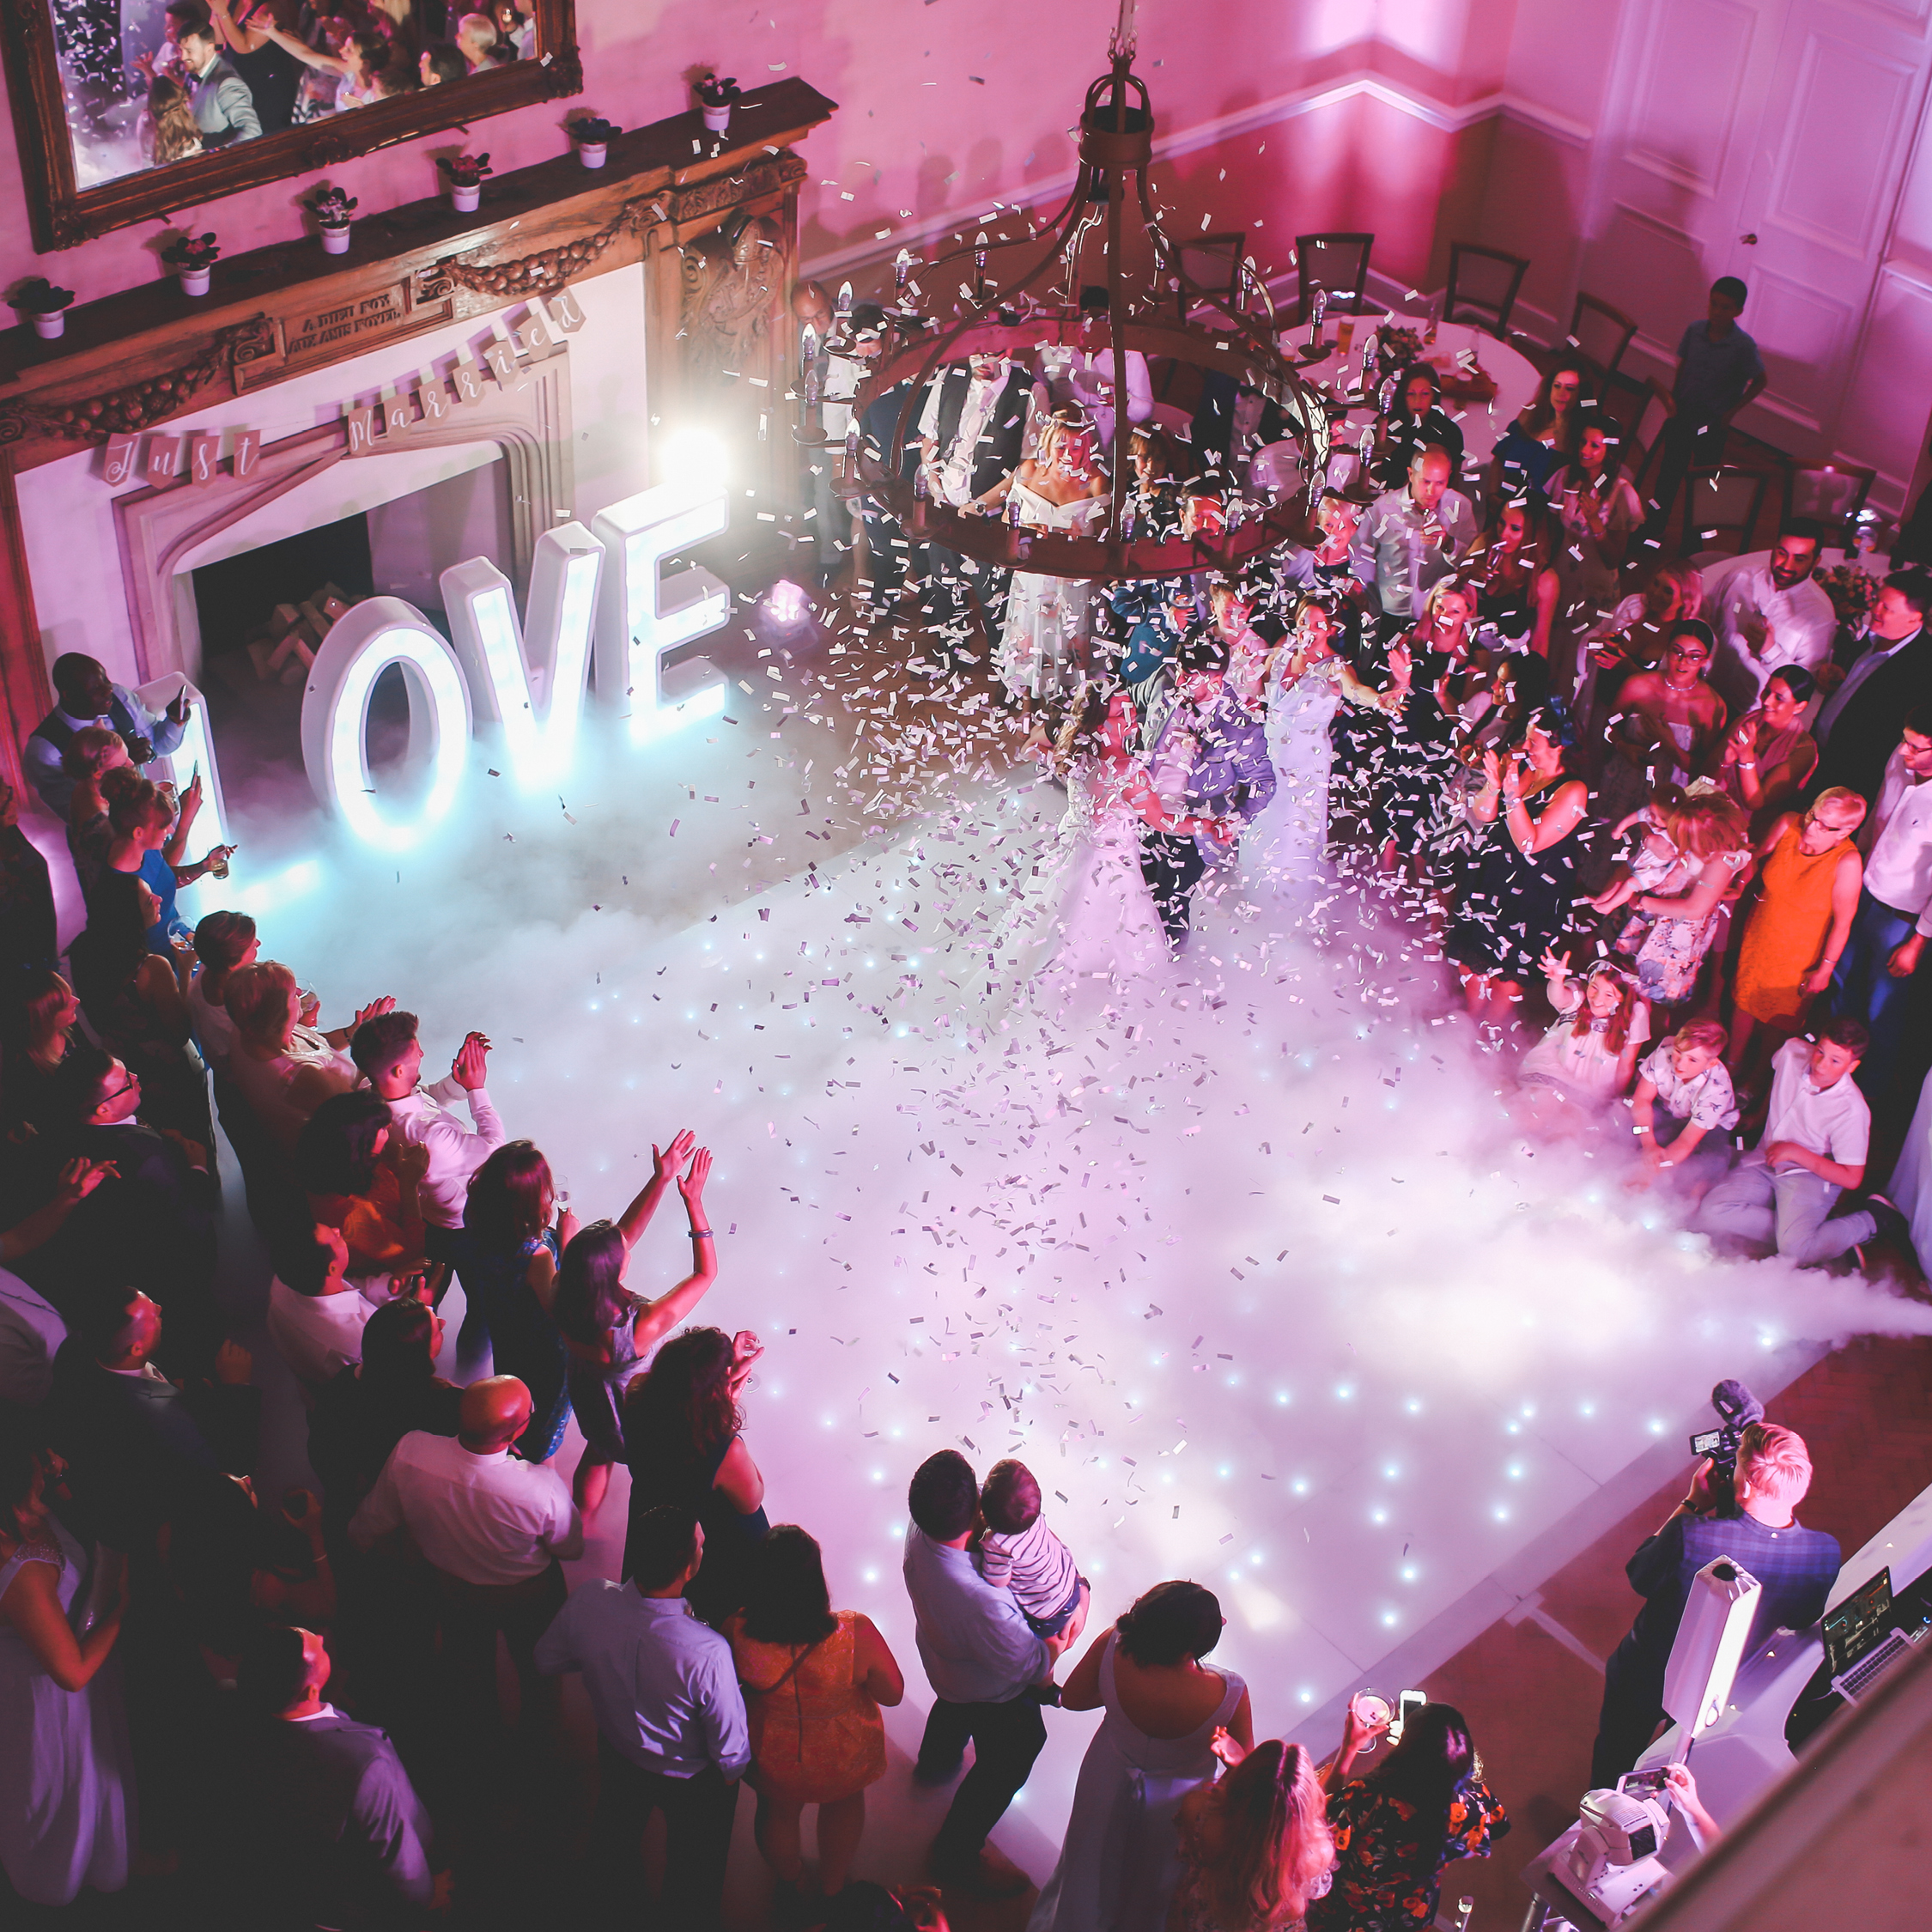 Creative Ways to Entertain Your Wedding Guests, confetti cannon, wedding music